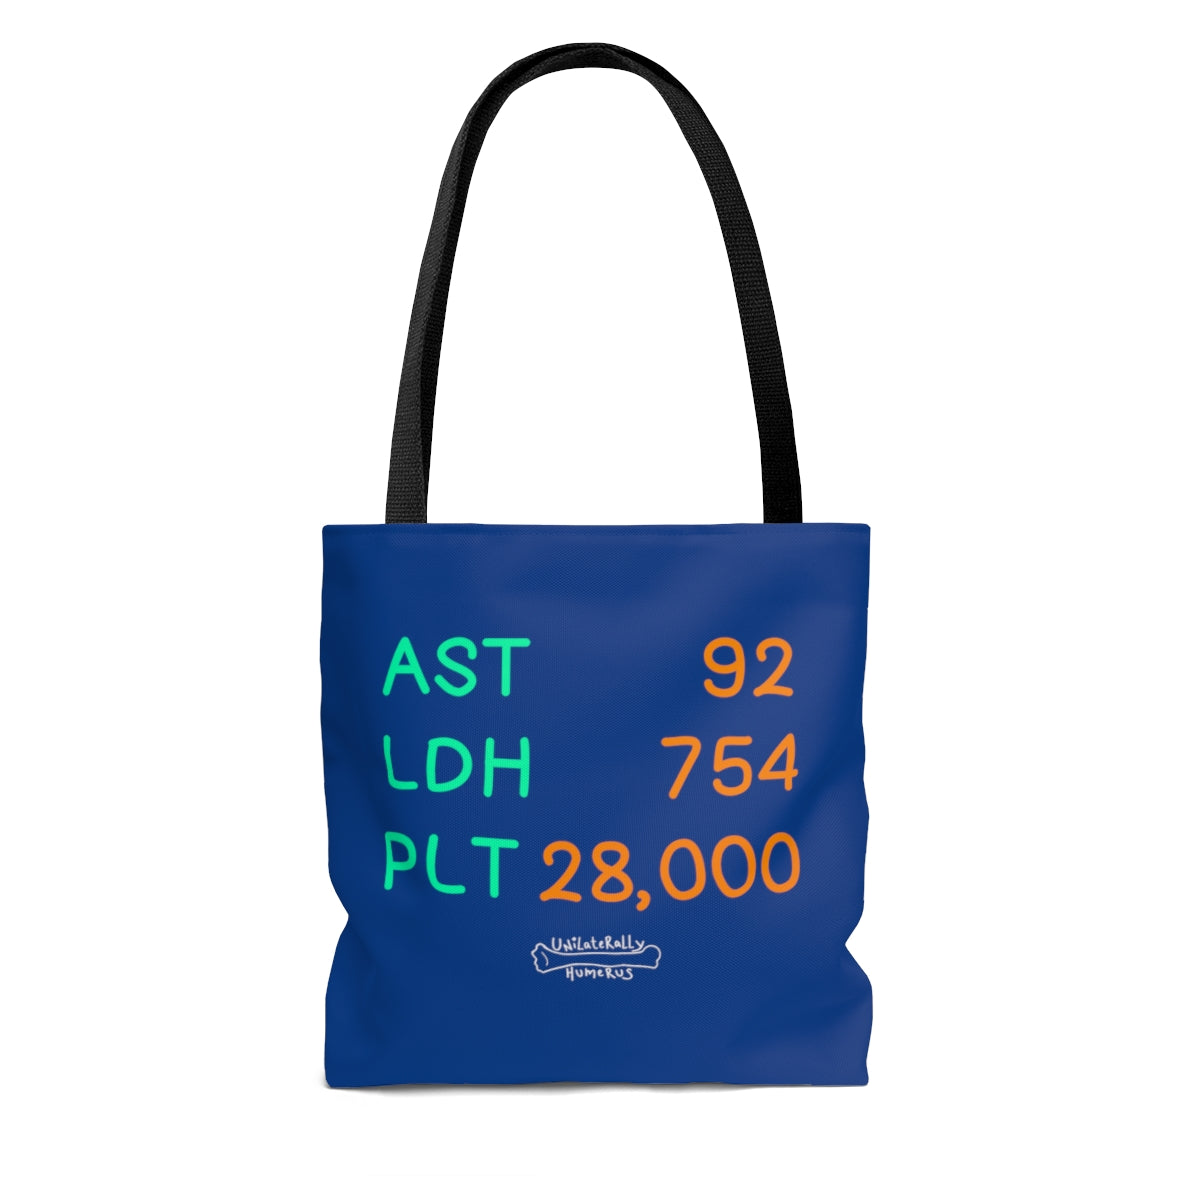 A Little HELLP Here! Tote Bag